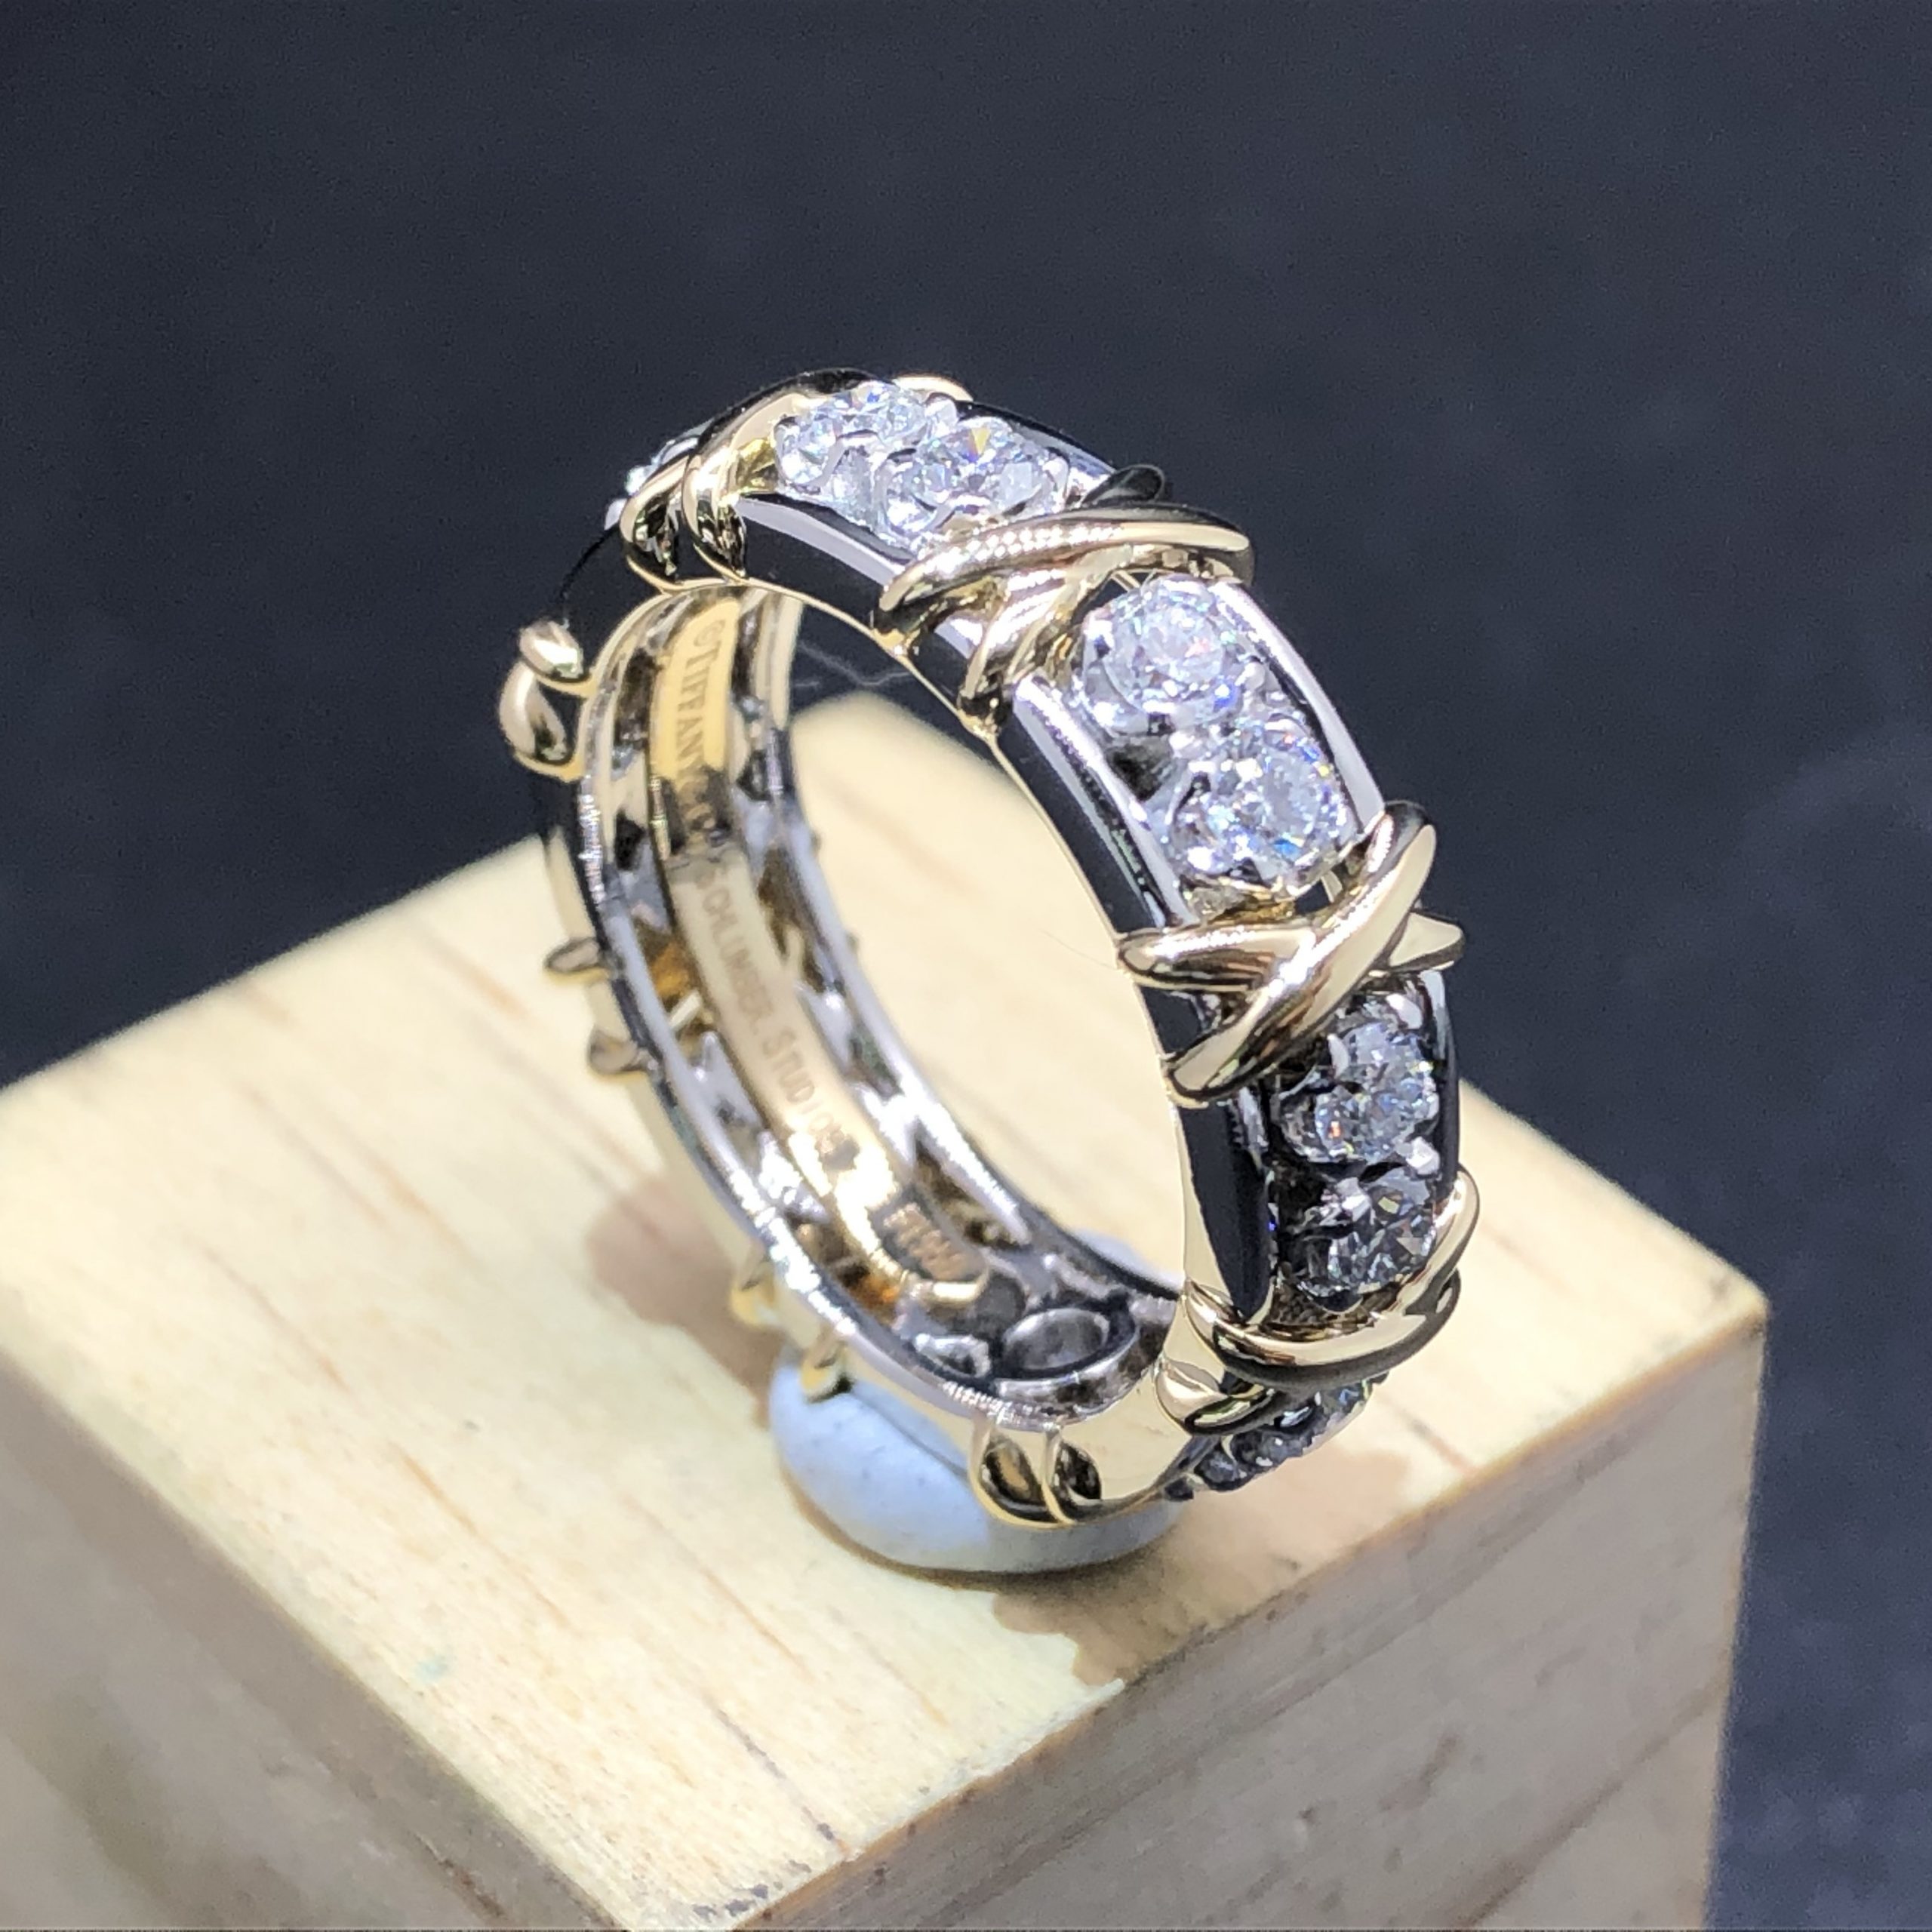 Tiffany & Co. Schlumberger Sixteen Diamonds Ring Custom Made in 18K Yellow Gold and Platinum